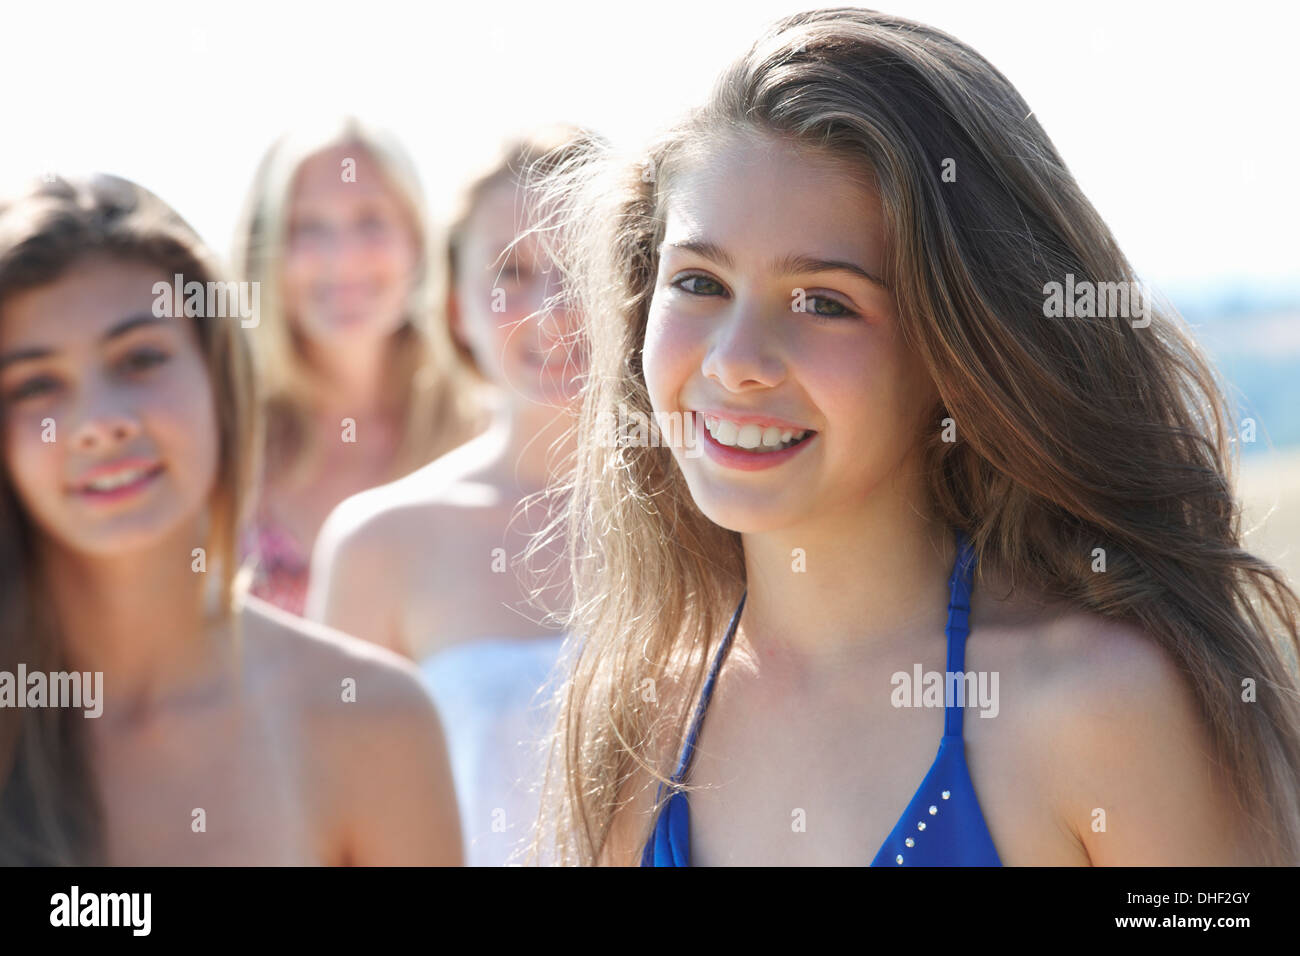 Portrait of girl with sisters in background Stock Photo